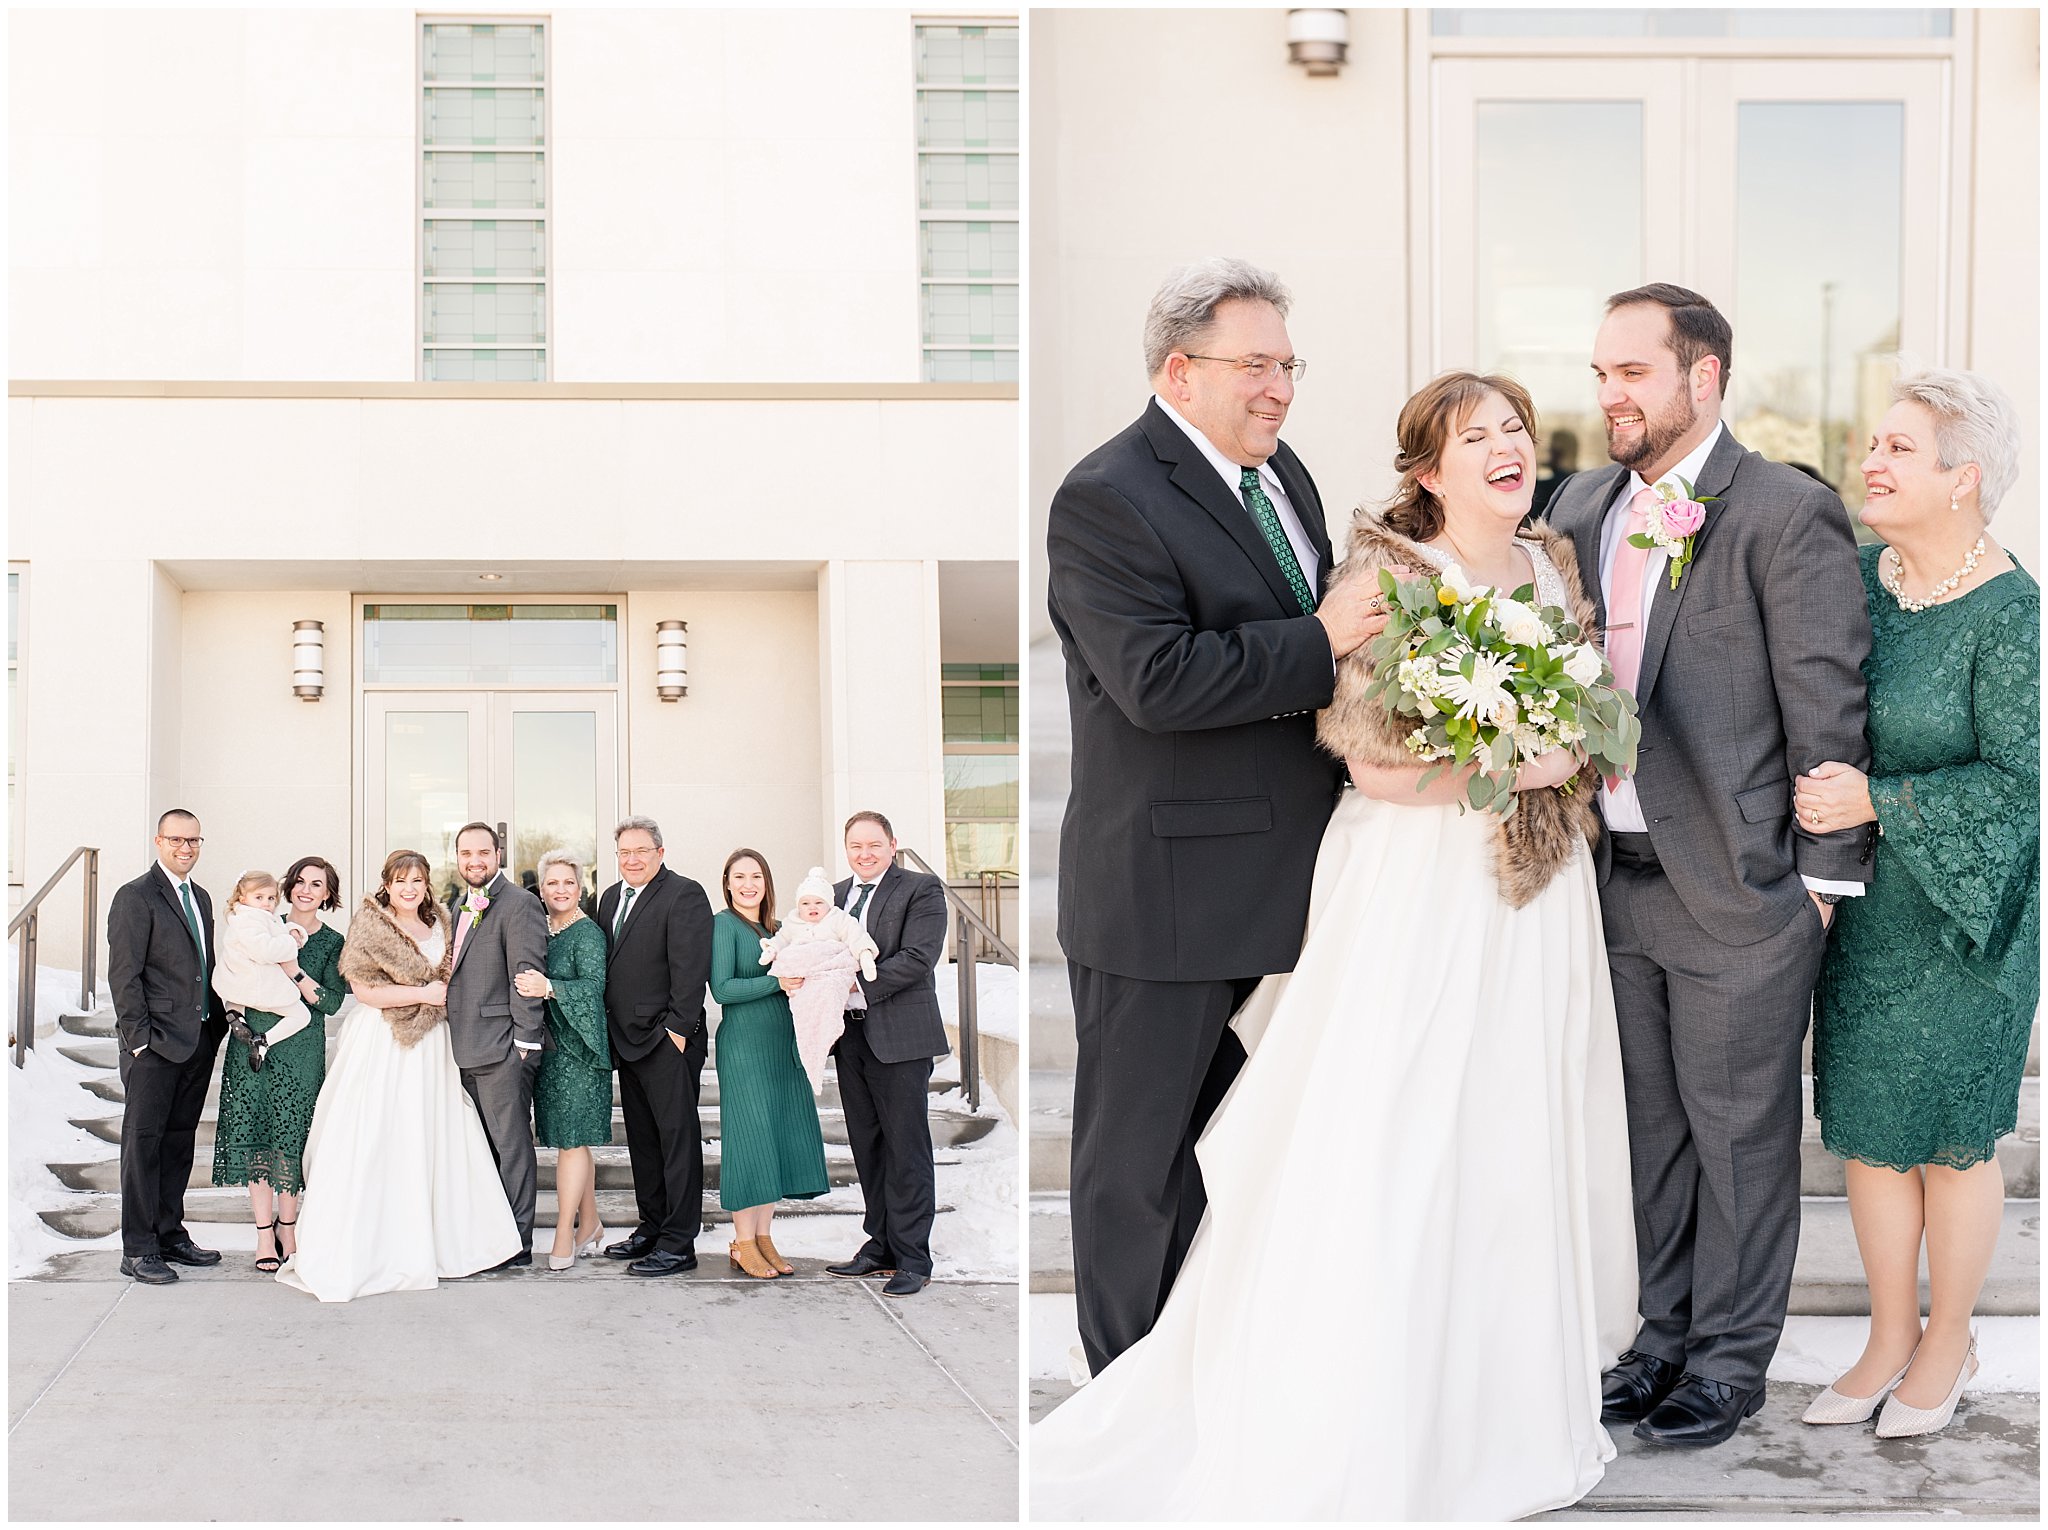 Bride and groom with family | Ogden Temple Wedding | Jessie and Dallin Photography